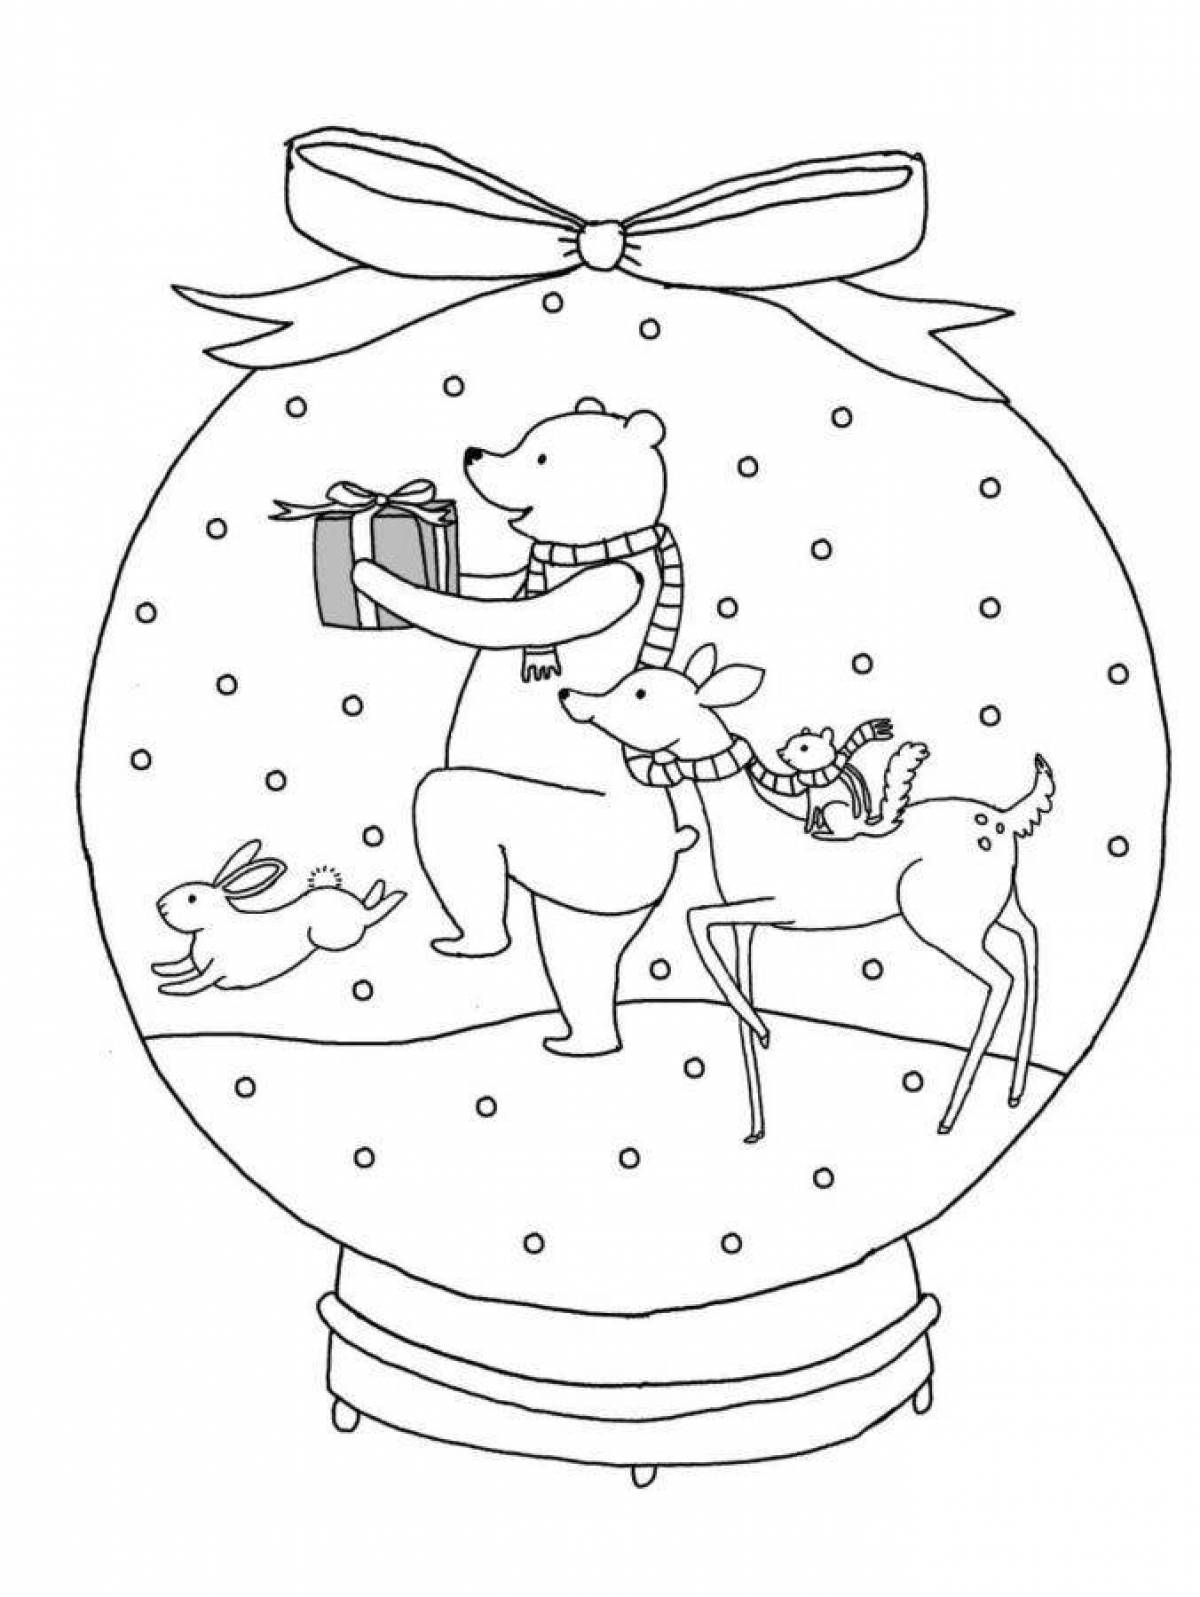 Glossy winter ball coloring page